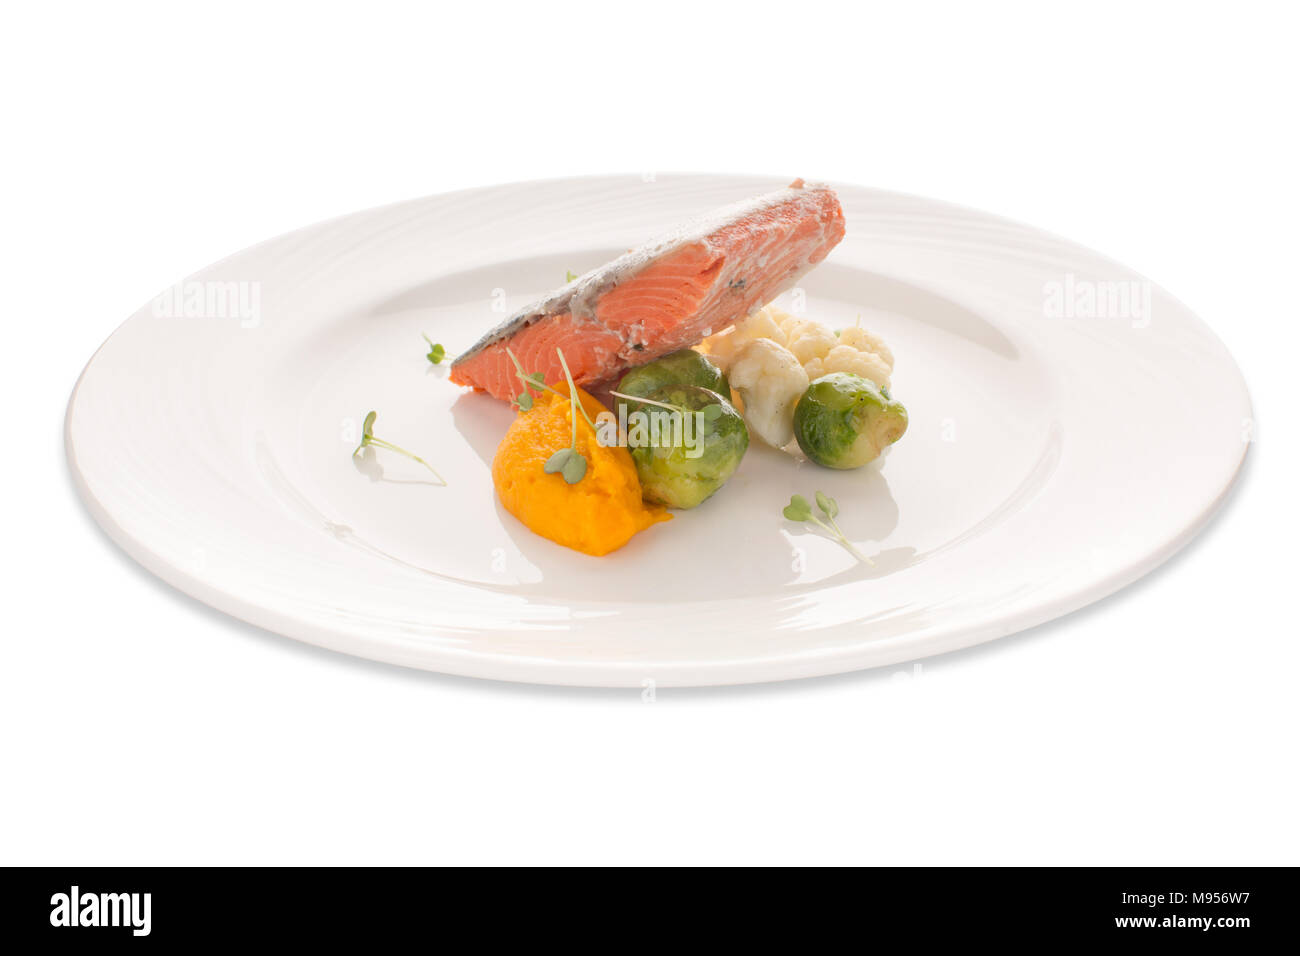 Red fish with vegetables on a white plate Stock Photo